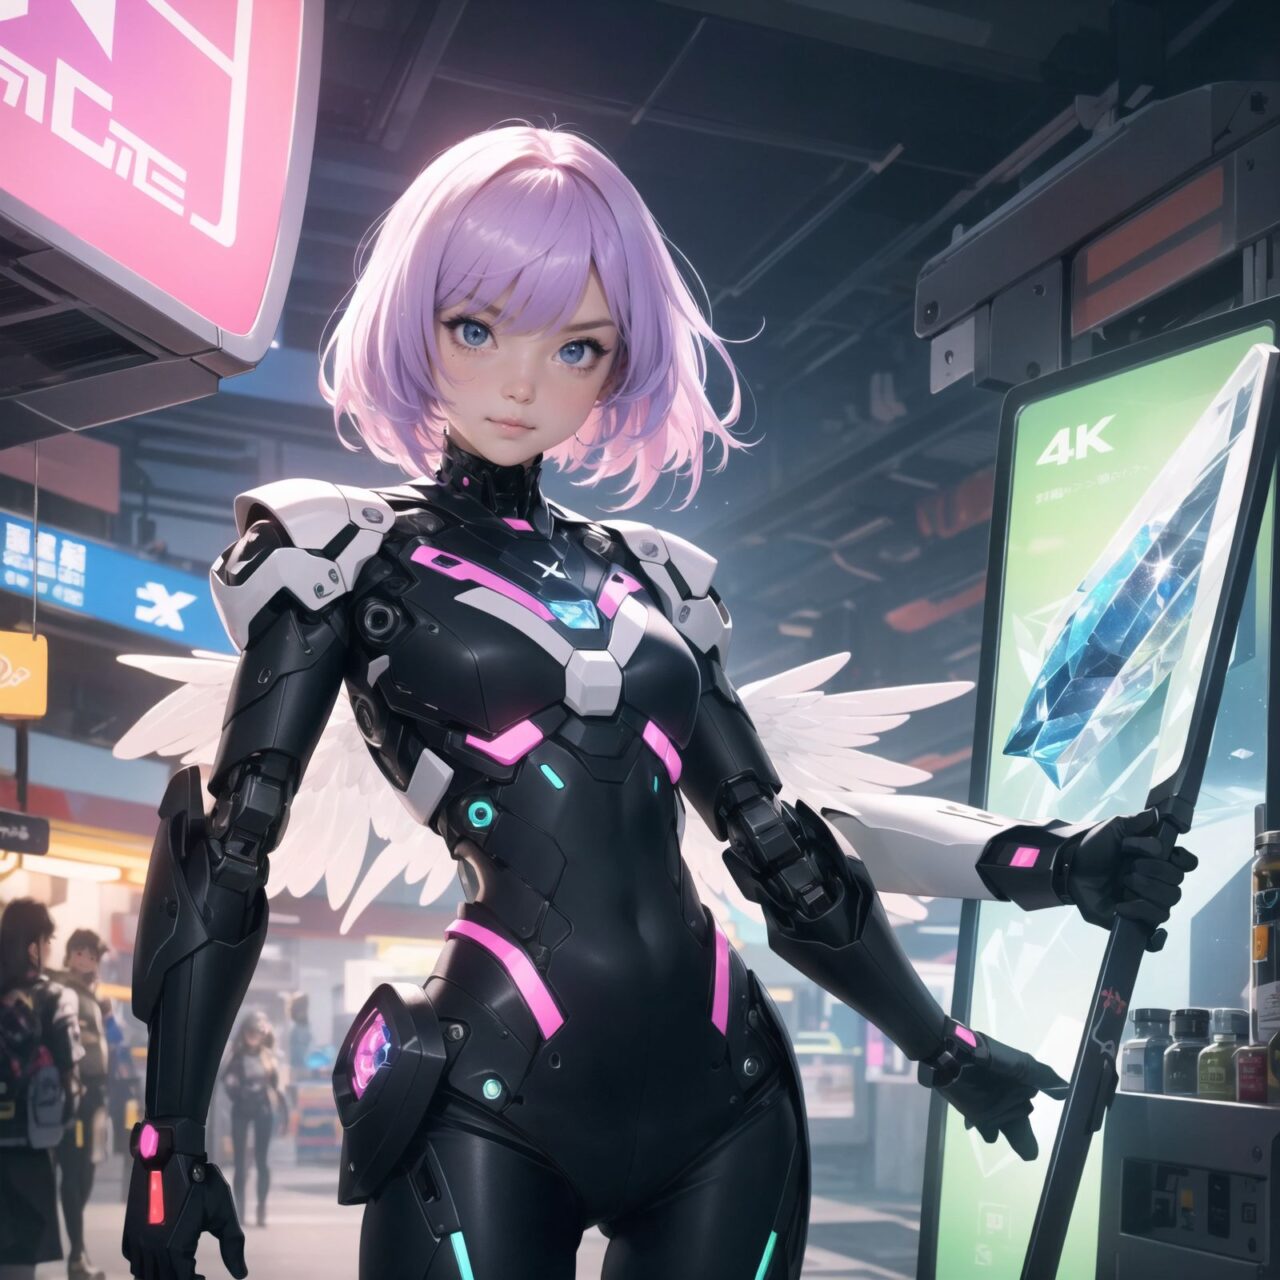 Two cyborg girls, facing the camera, cowboy shot (from waist up), 
one girl with long pink hair, braided with silver threads, wearing a sleek black bodysuit with neon accents, robotic arms with intricate designs, blue glowing eyes, playful smile, holding a small holographic device projecting a cute animal,

the other girl with short purple hair, styled in a futuristic bob, wearing a white and gold exoskeleton suit, her eyes a striking green with circuit patterns, serious expression, delicate robotic wings folded behind her, holding a staff with a floating crystal,

background of a bustling futuristic marketplace, vibrant neon lights, hovering vendor stalls, various alien and human customers, blending natural elements like hanging gardens and water features,

soft and dynamic lighting, high detail, capturing the textures of their hair and clothing, professional clarity, ultra-high resolution, 4K quality, anime-inspired visuals, emphasizing their unique characteristics and interactions